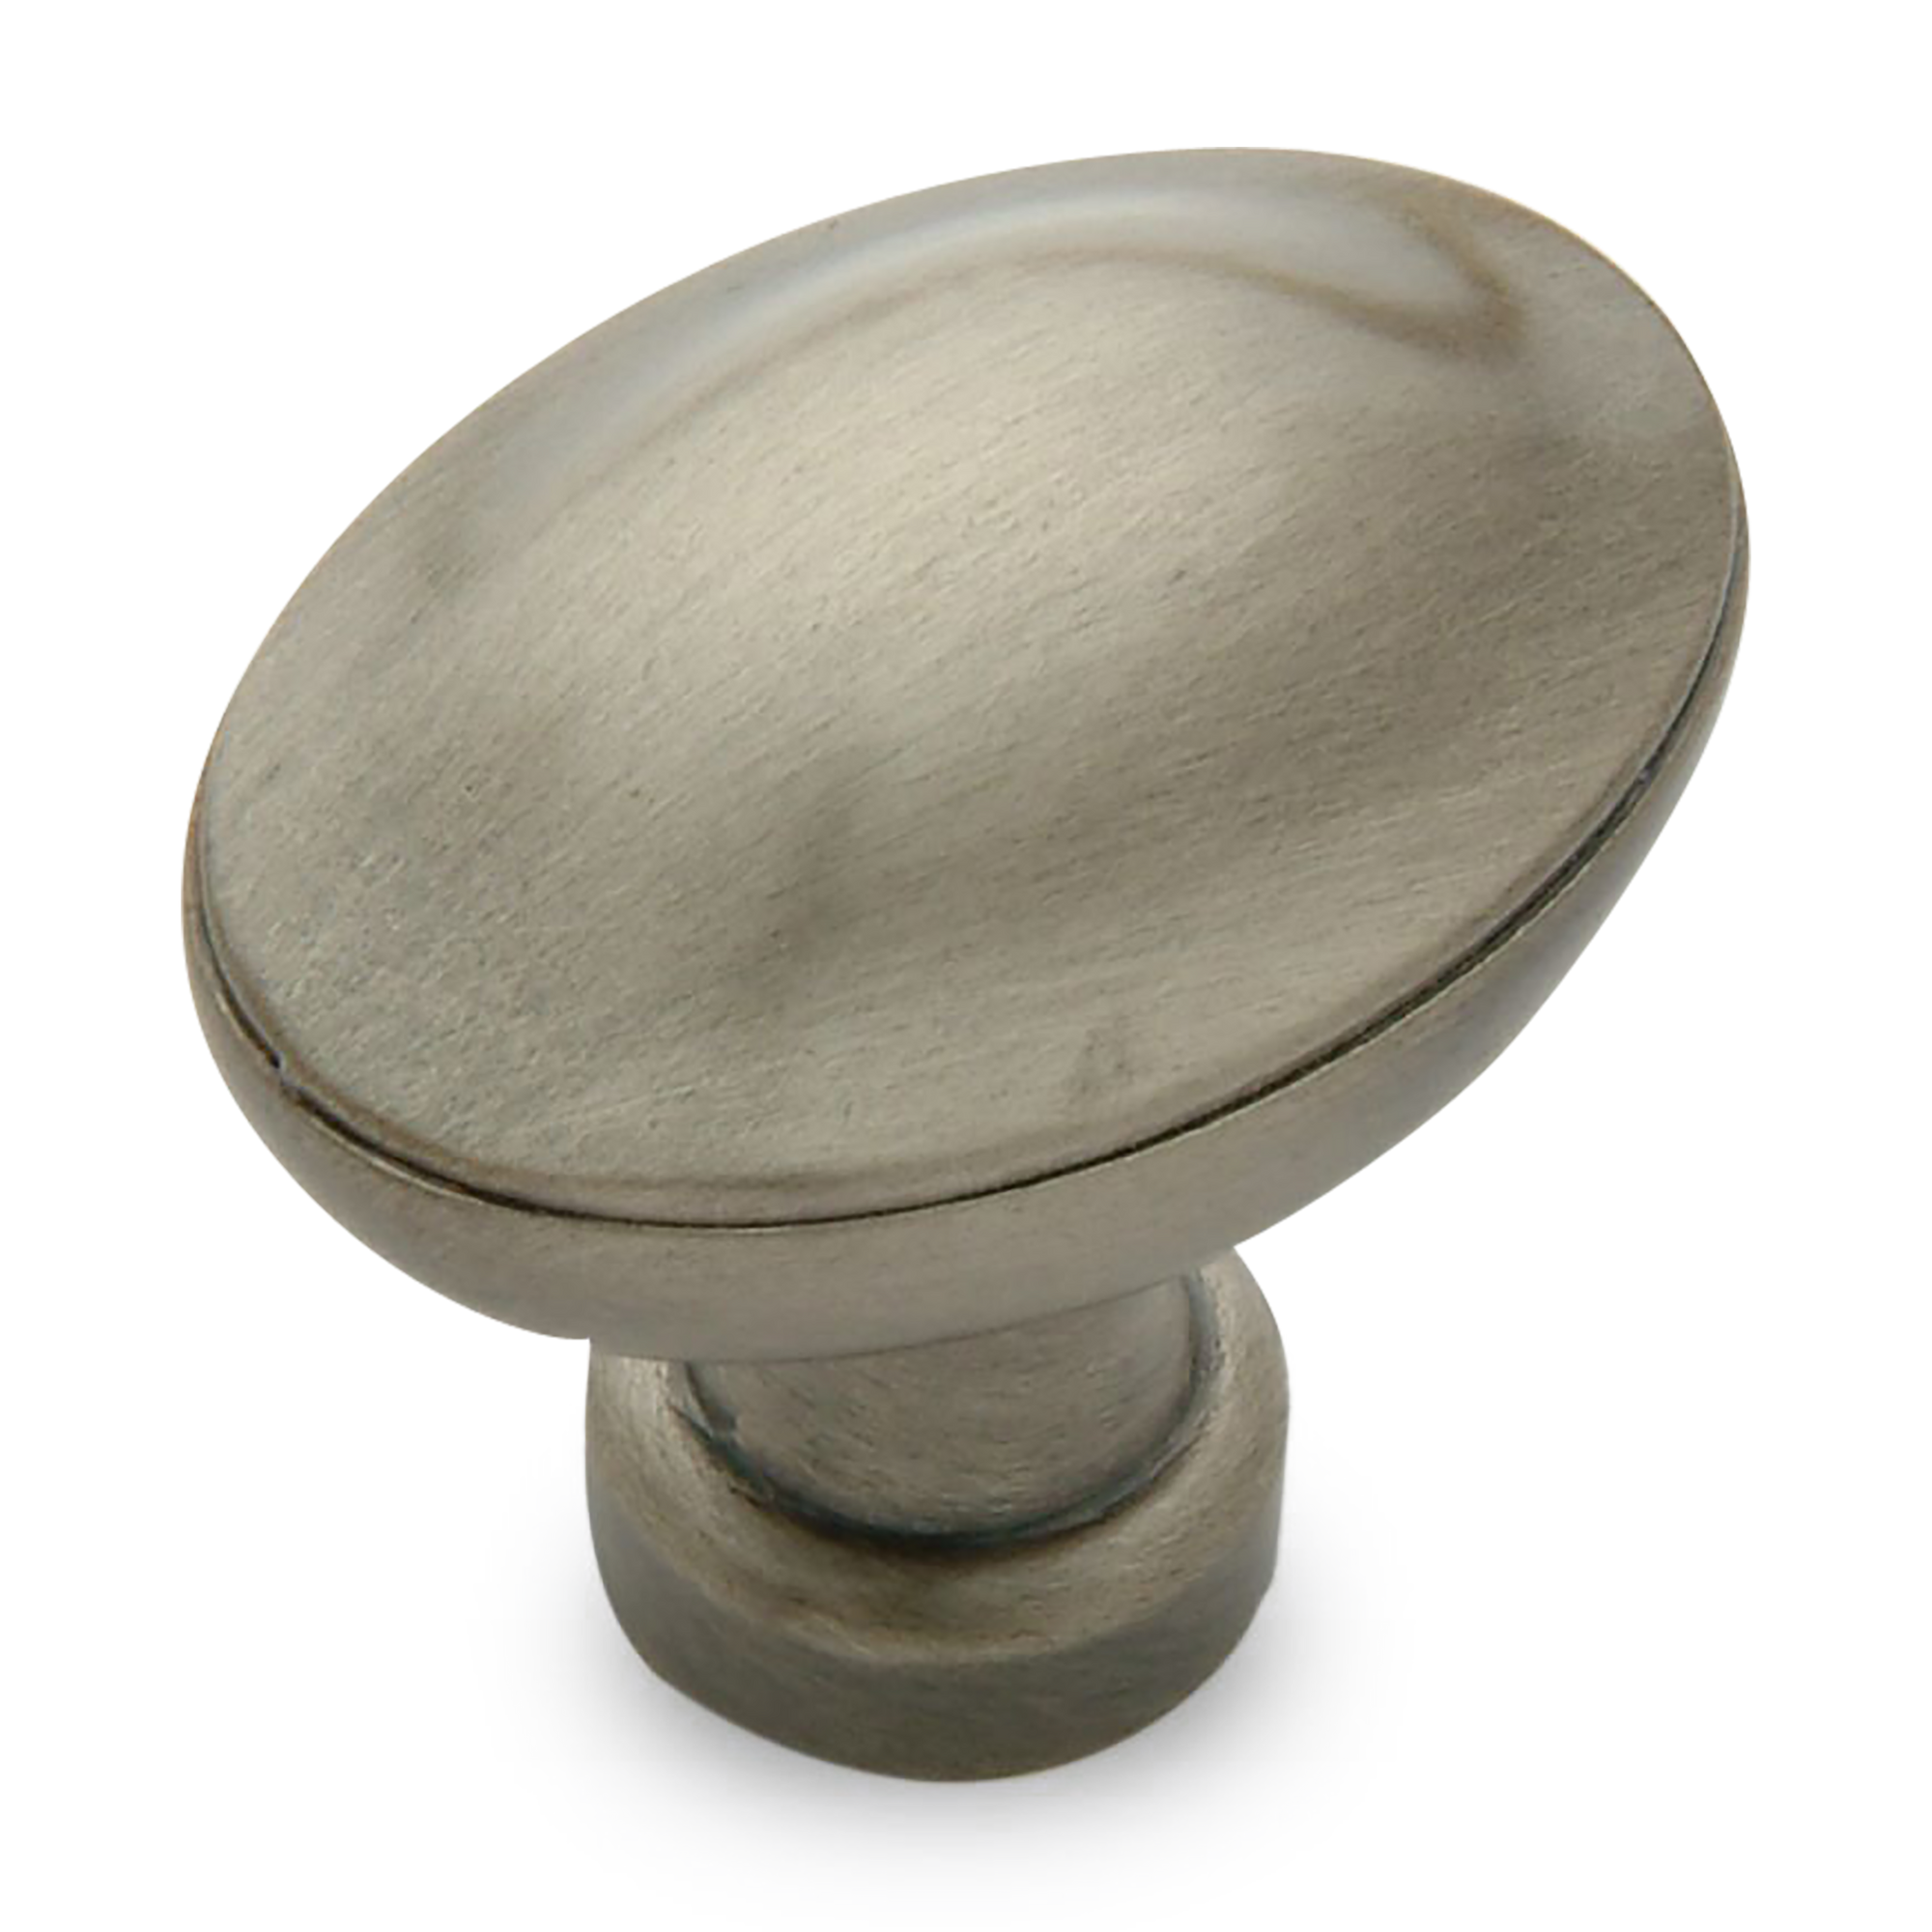 A sleek, and uniquely designed knob with a rounded top.